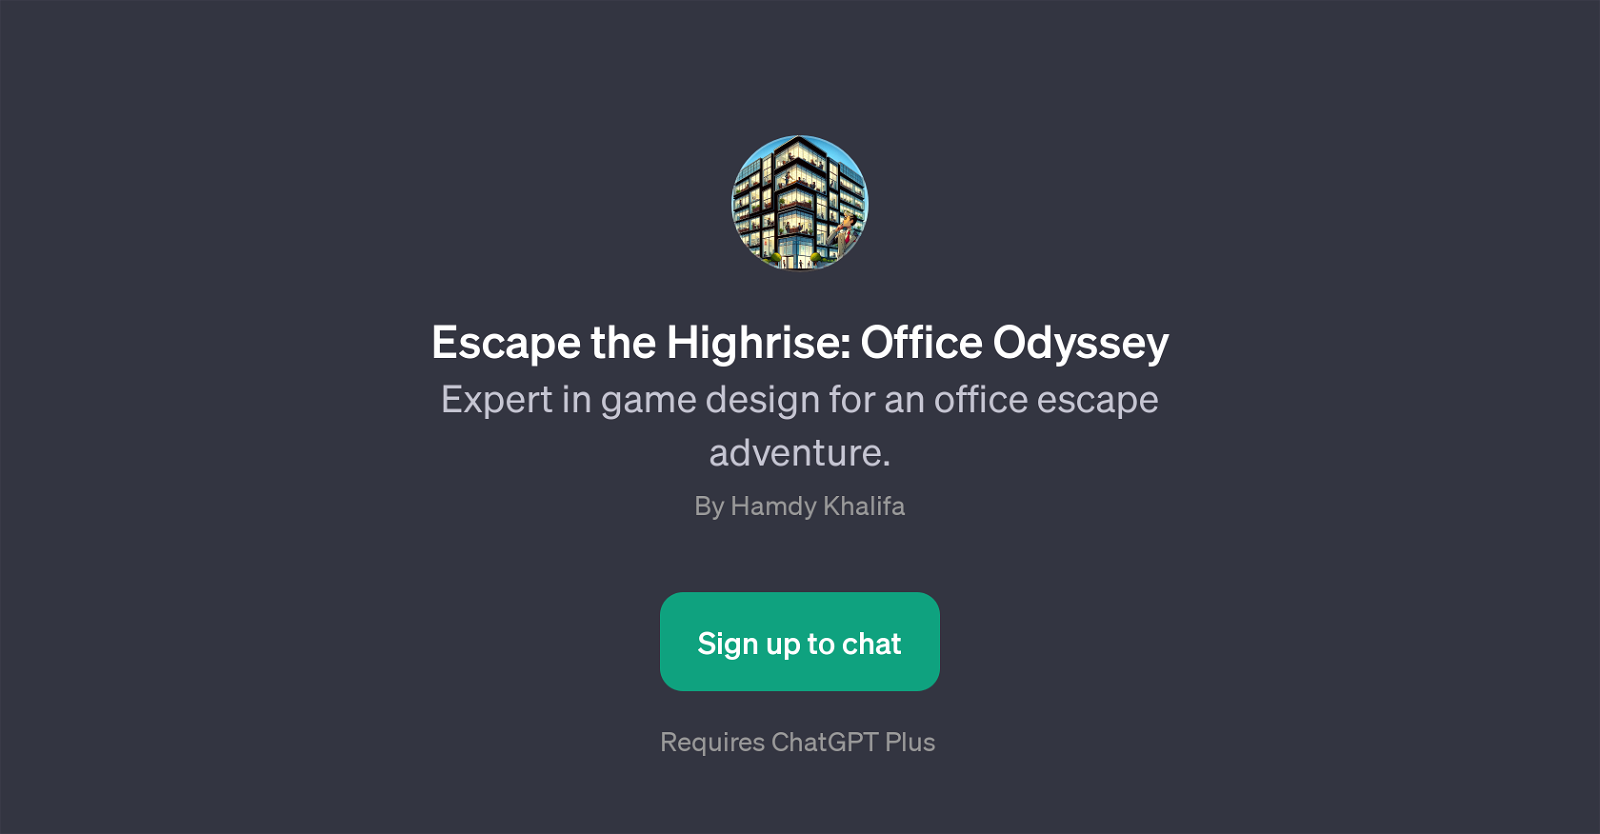 Escape the Highrise: Office Odyssey website